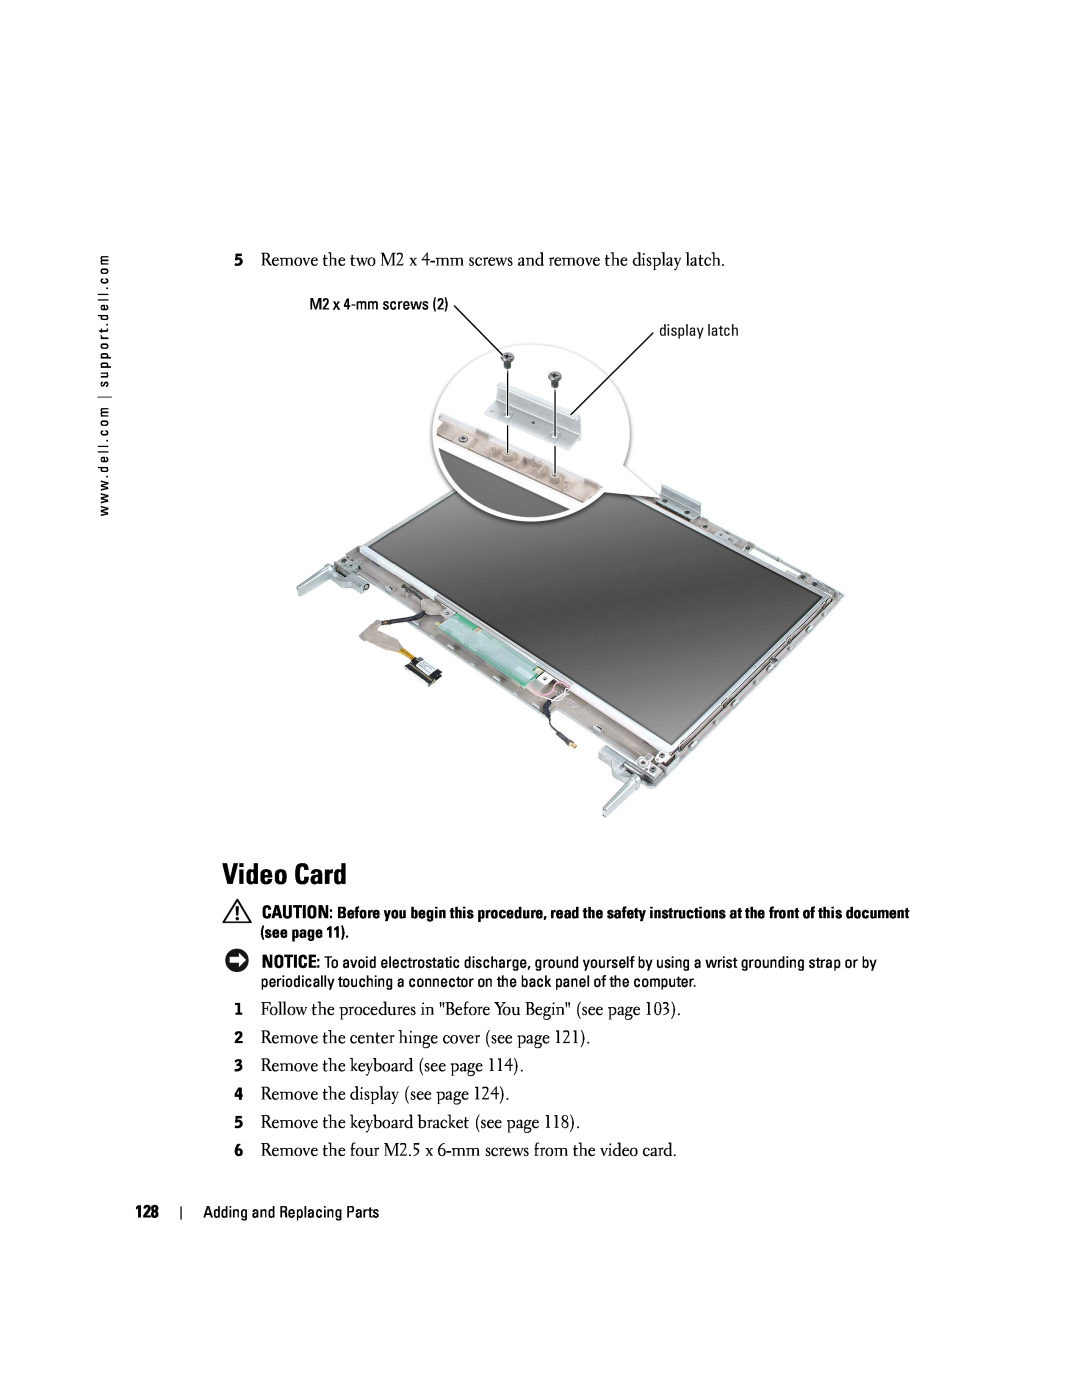 Dell PP09L owner manual Video Card 